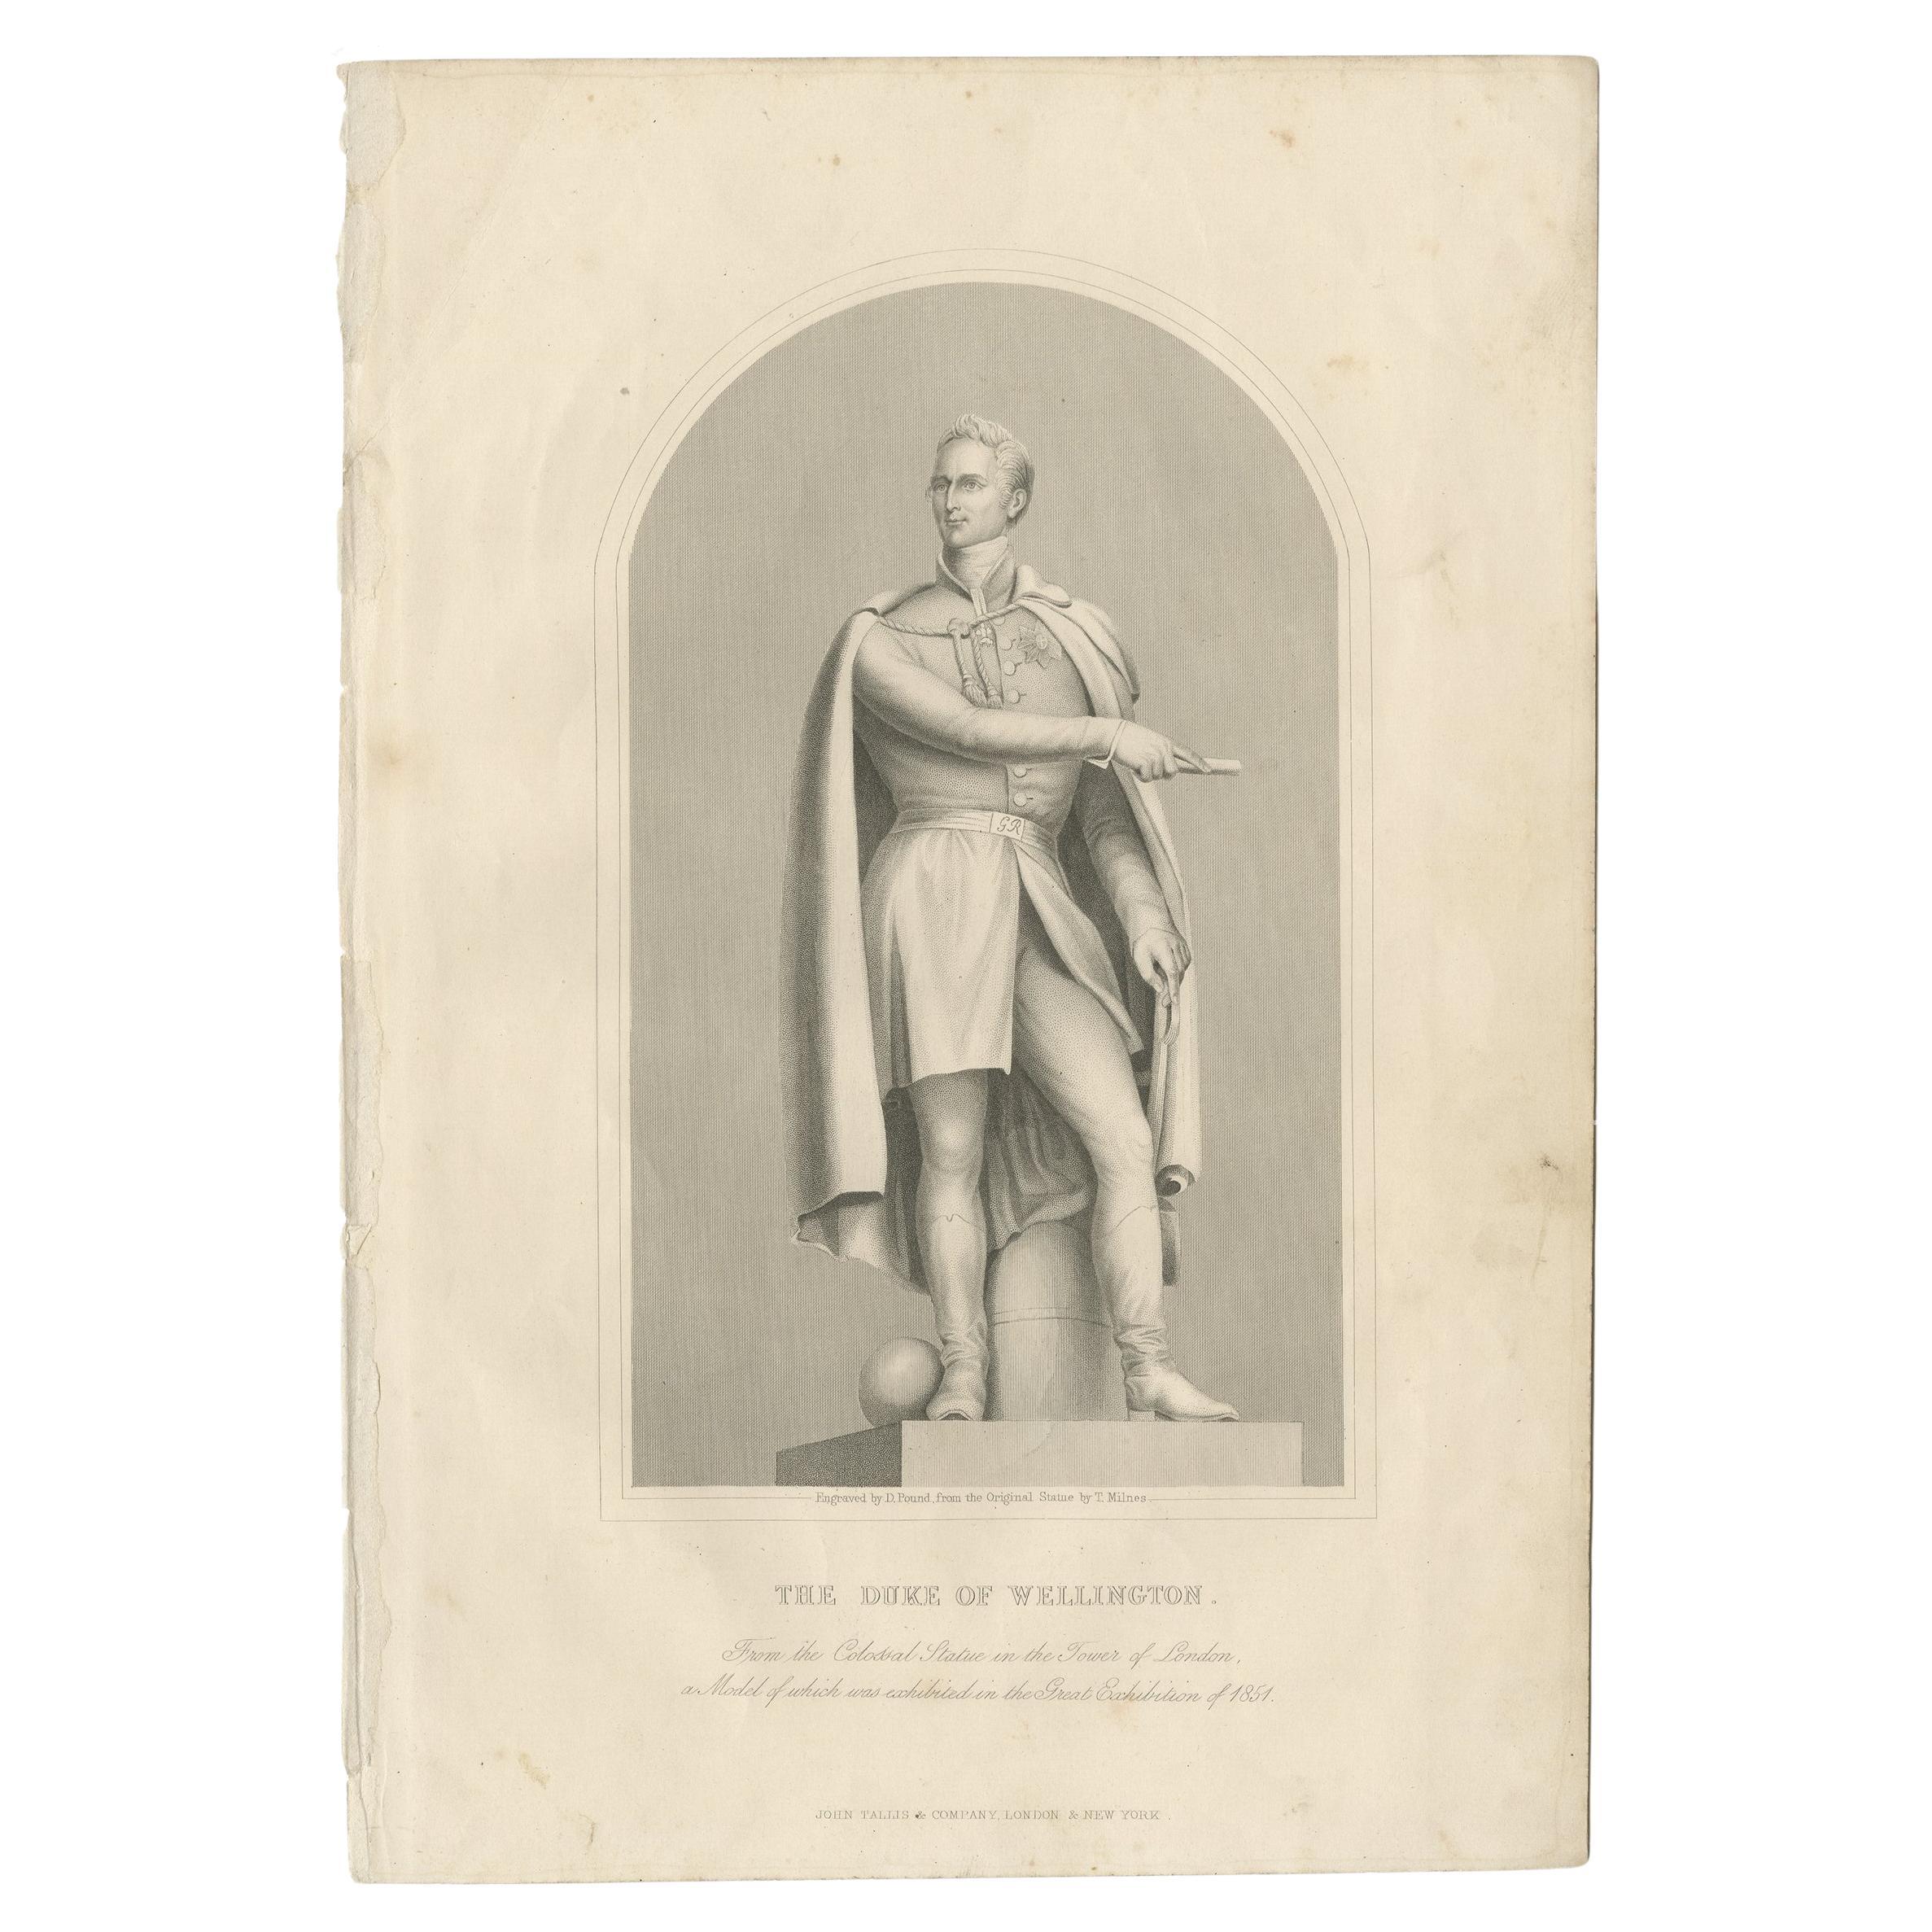 Antique portrait titled 'The Duke of Wellington'. Engraved by D. Pound from the original statue by T. Milnes in the Tower of London. This print originates from 'The British Colonies, their history, extent, condition and resources', by Montgomery